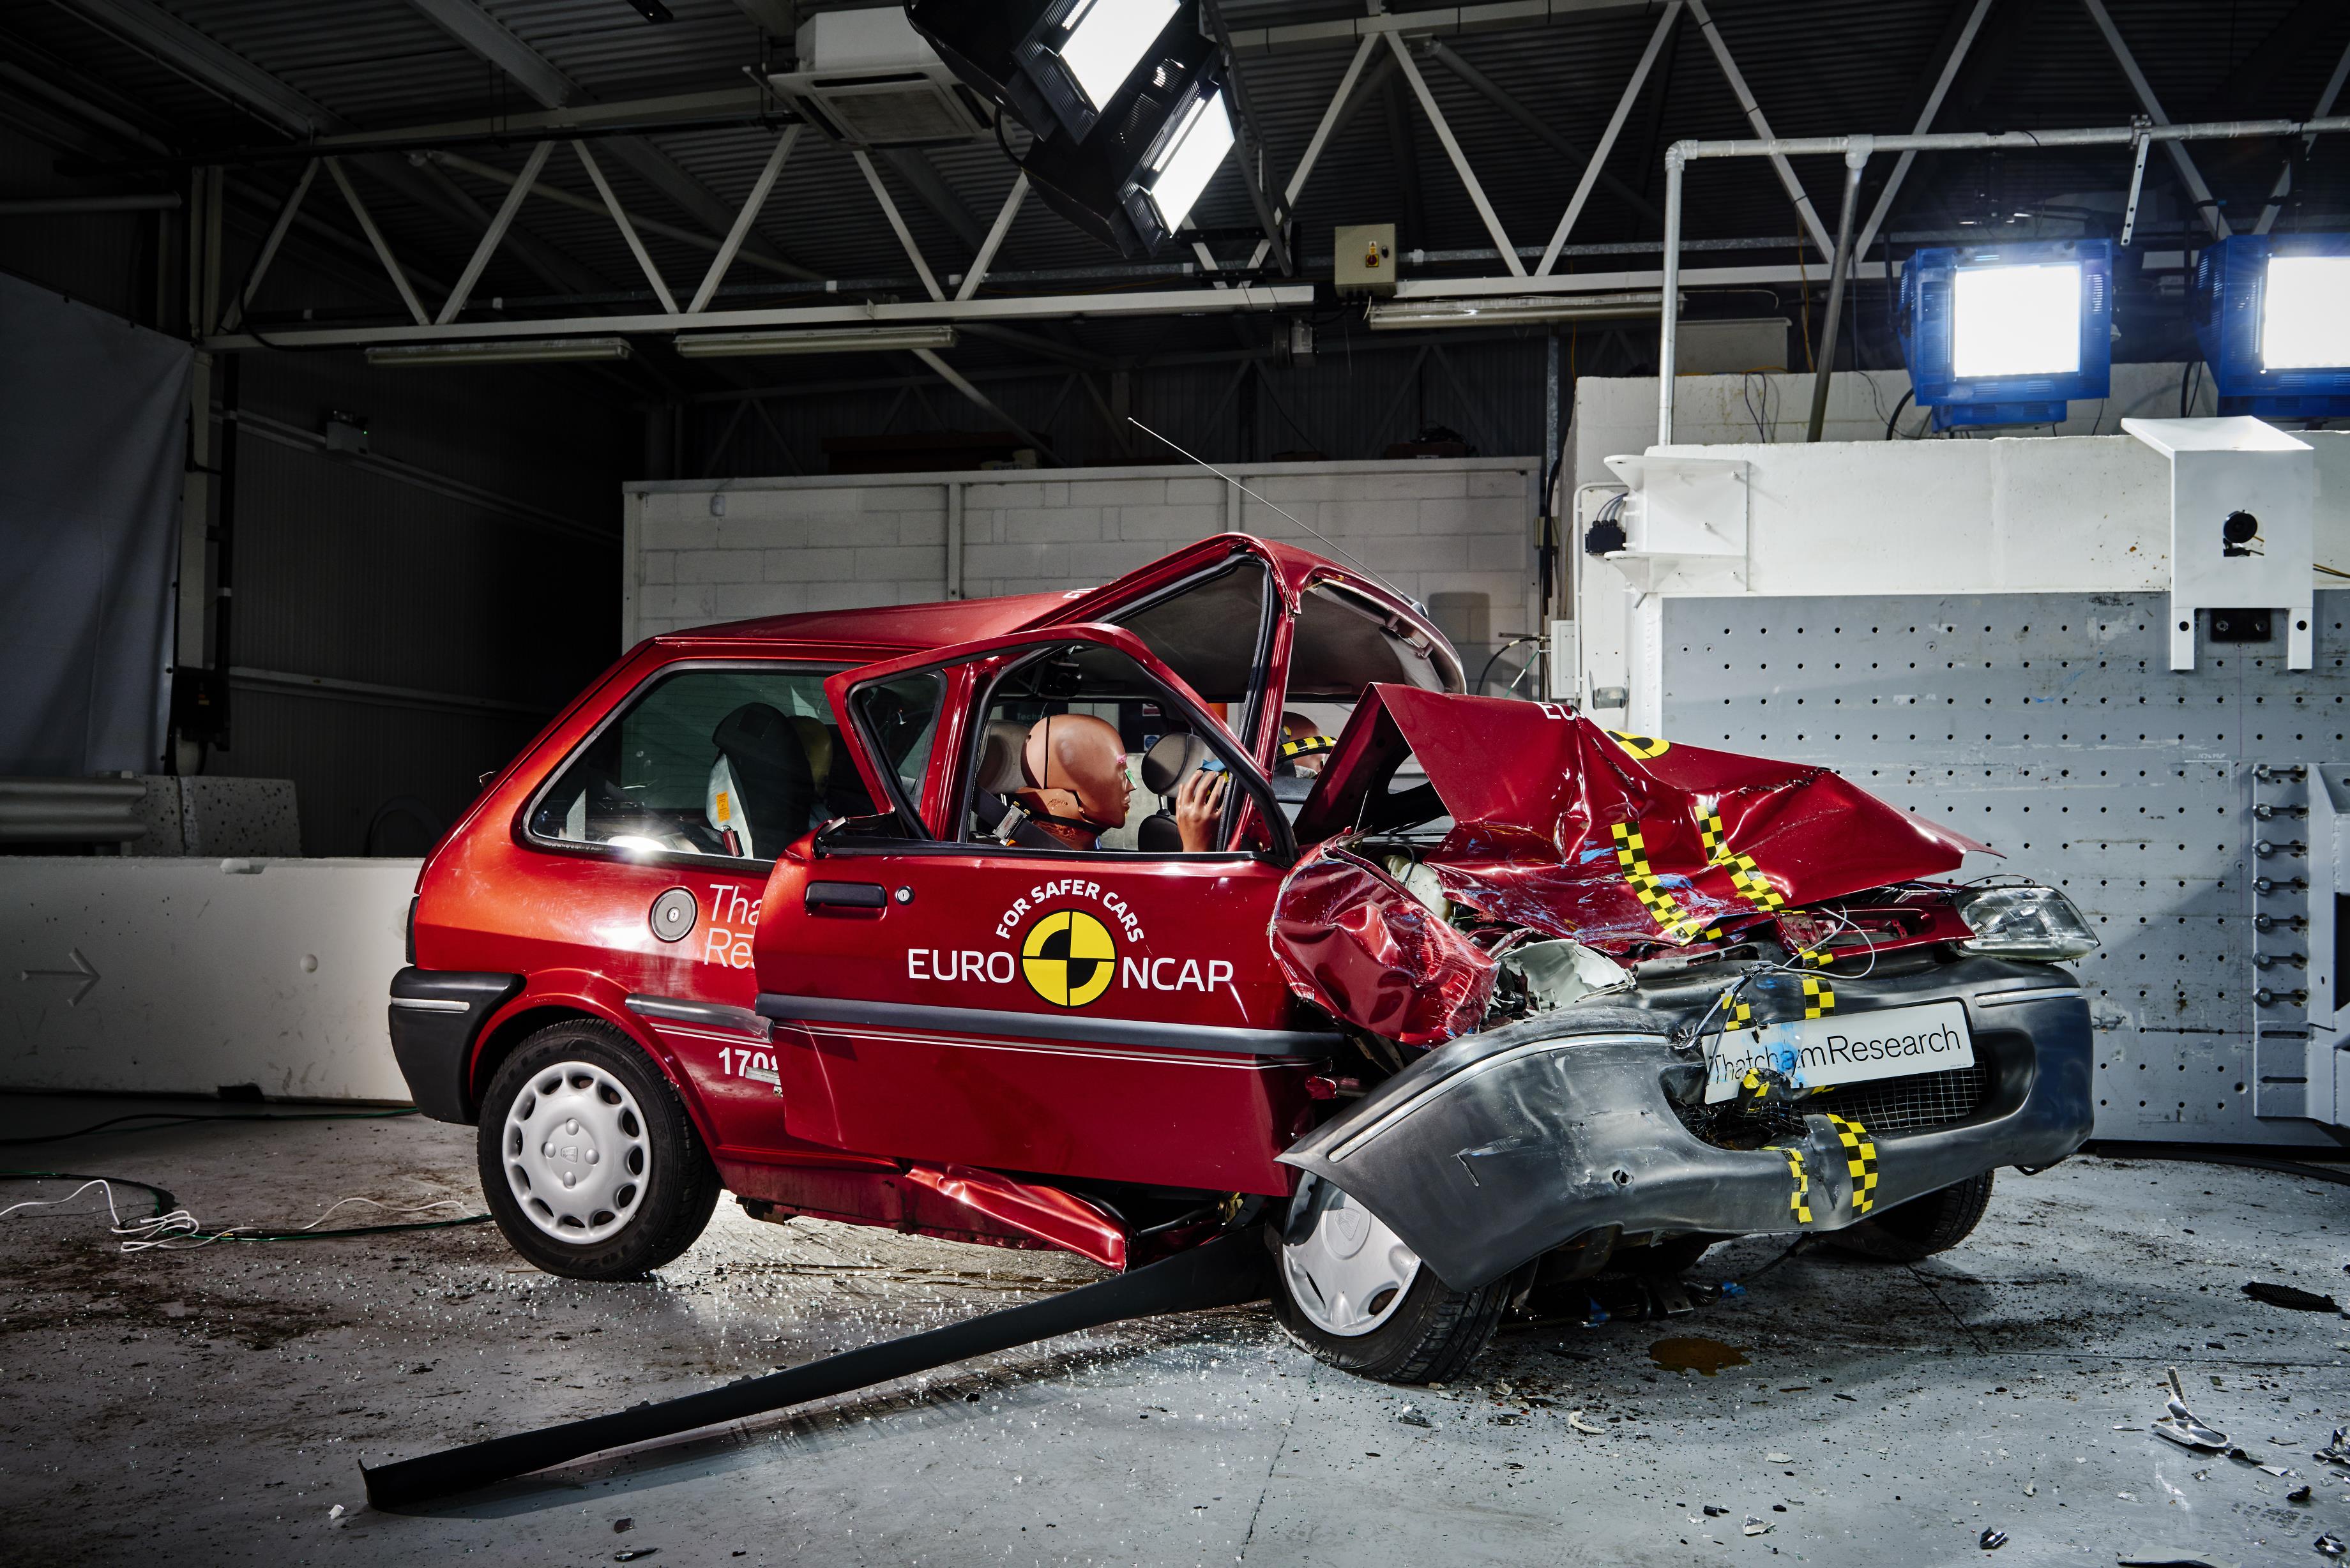 What brought production of the Rover 100 crashing to a halt?